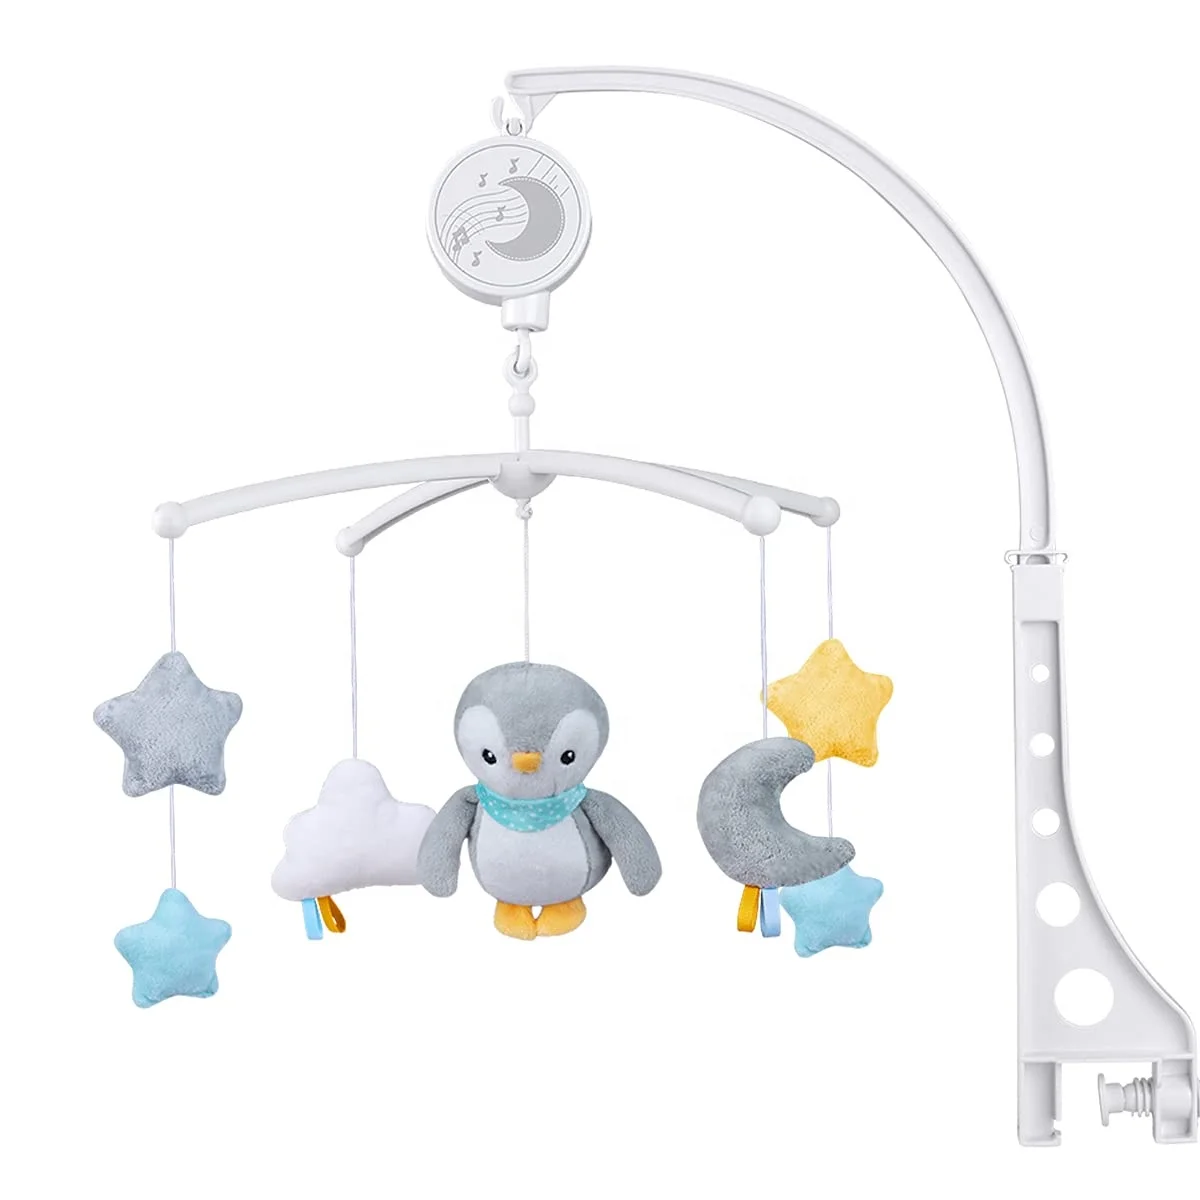 Baby Musical Mobile With Music Box Rotating Penguin Mobile Soother Crib Toy Gift For Nursery Bed Decoration Pe - Buy Musical Felt Crib Mobile,Felt Crib Mobile,Baby Crib Mobile Product